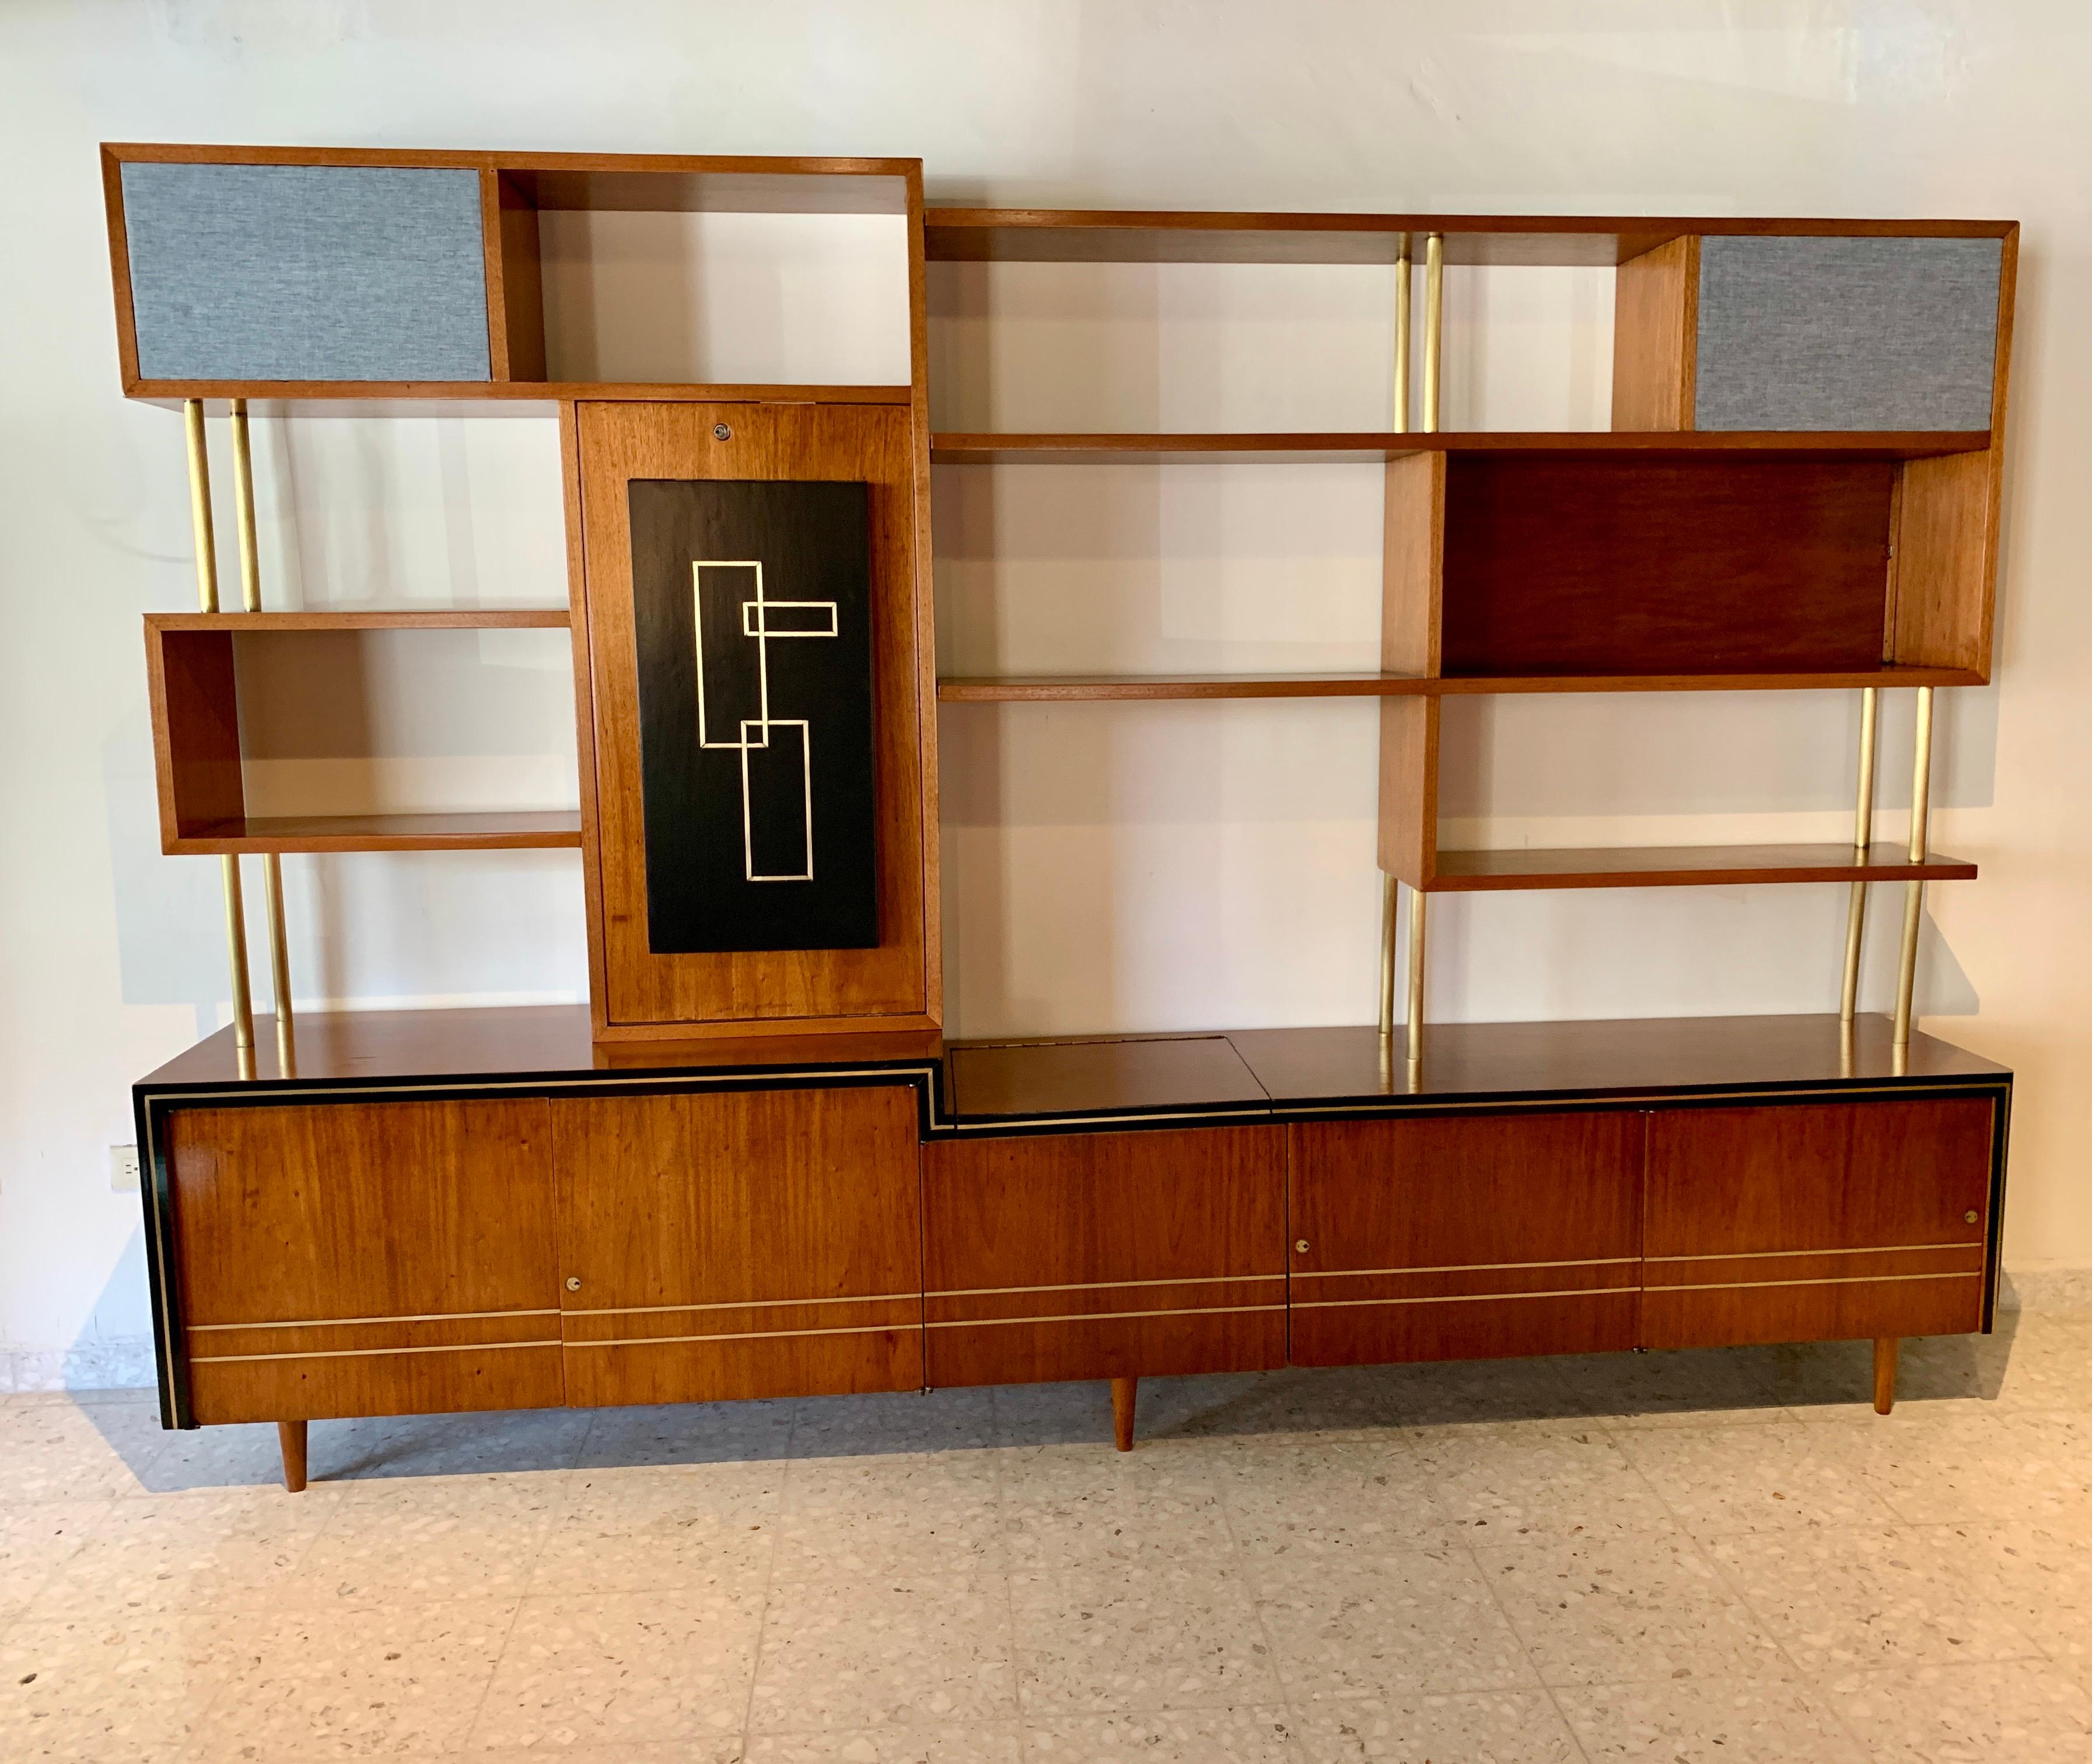 Spectacular wall unit by the Spanish designer and fervent admirer of Gio Ponti who settled in Mexico, Eugenio Escudero. Escudero is cataloged one of the greatest icons of Mexican modernism.
The bookcase was made to order to be able to place all the